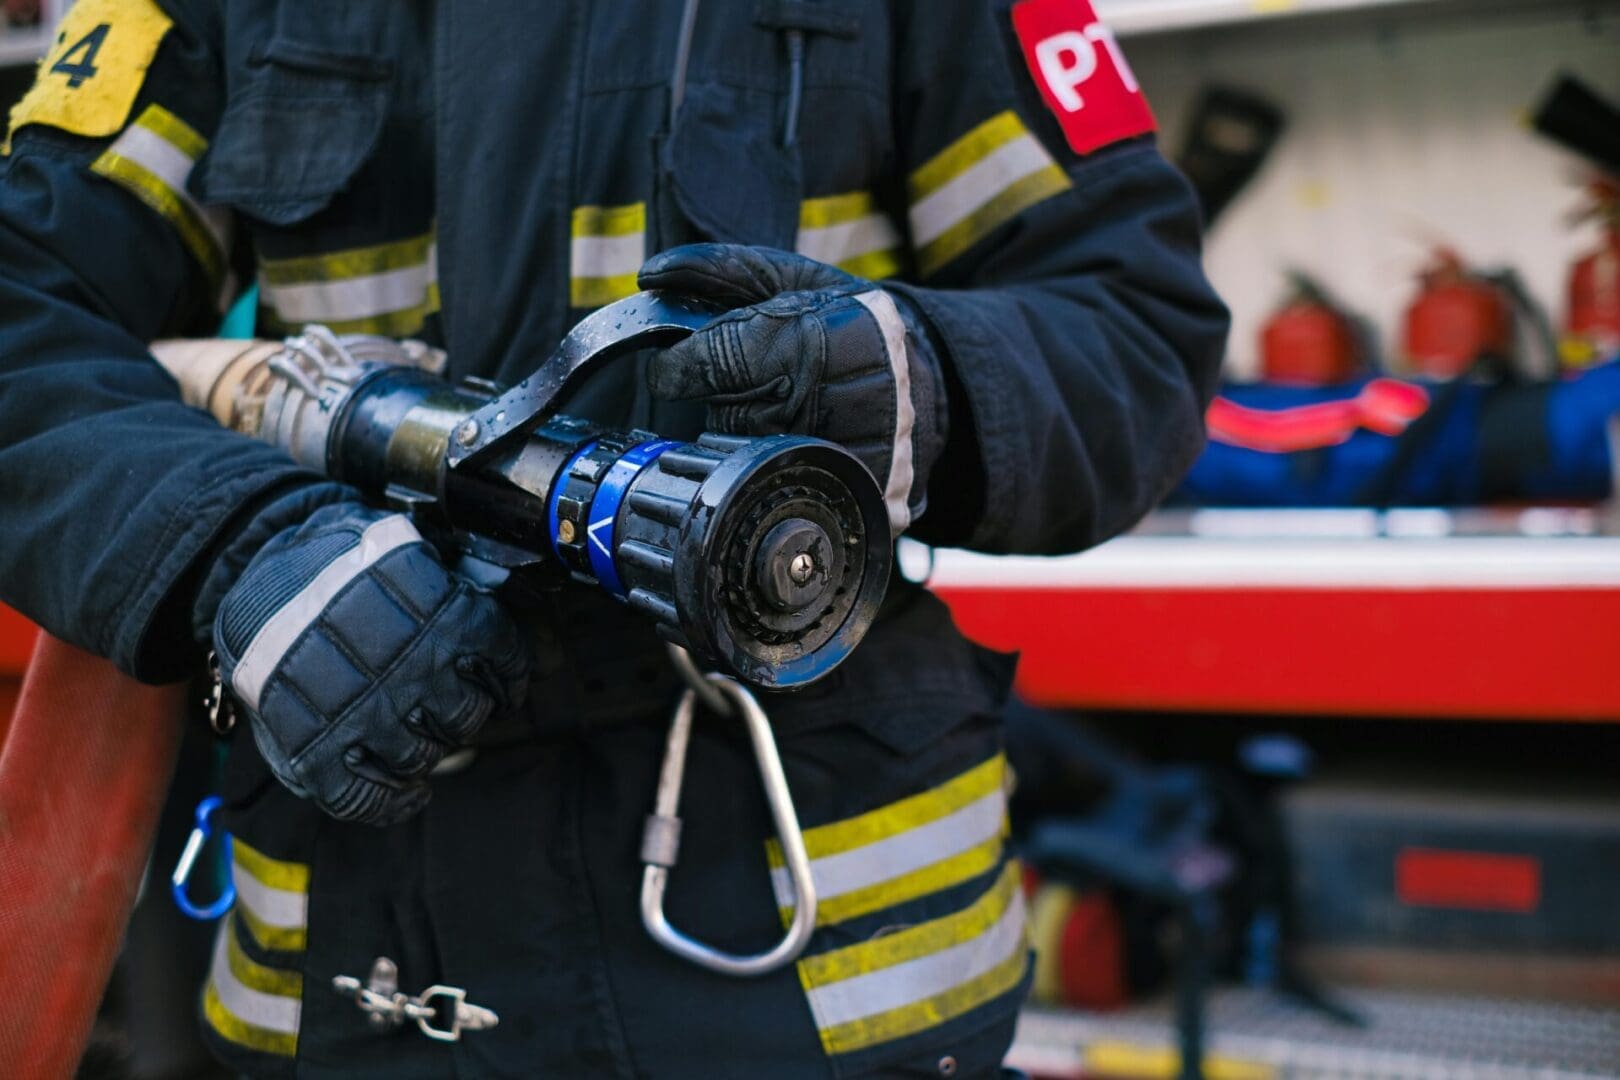 A close-up view of a firefighter holding a fire hose nozzle, dressed in protective gear with reflective stripes, near firefighting equipment.